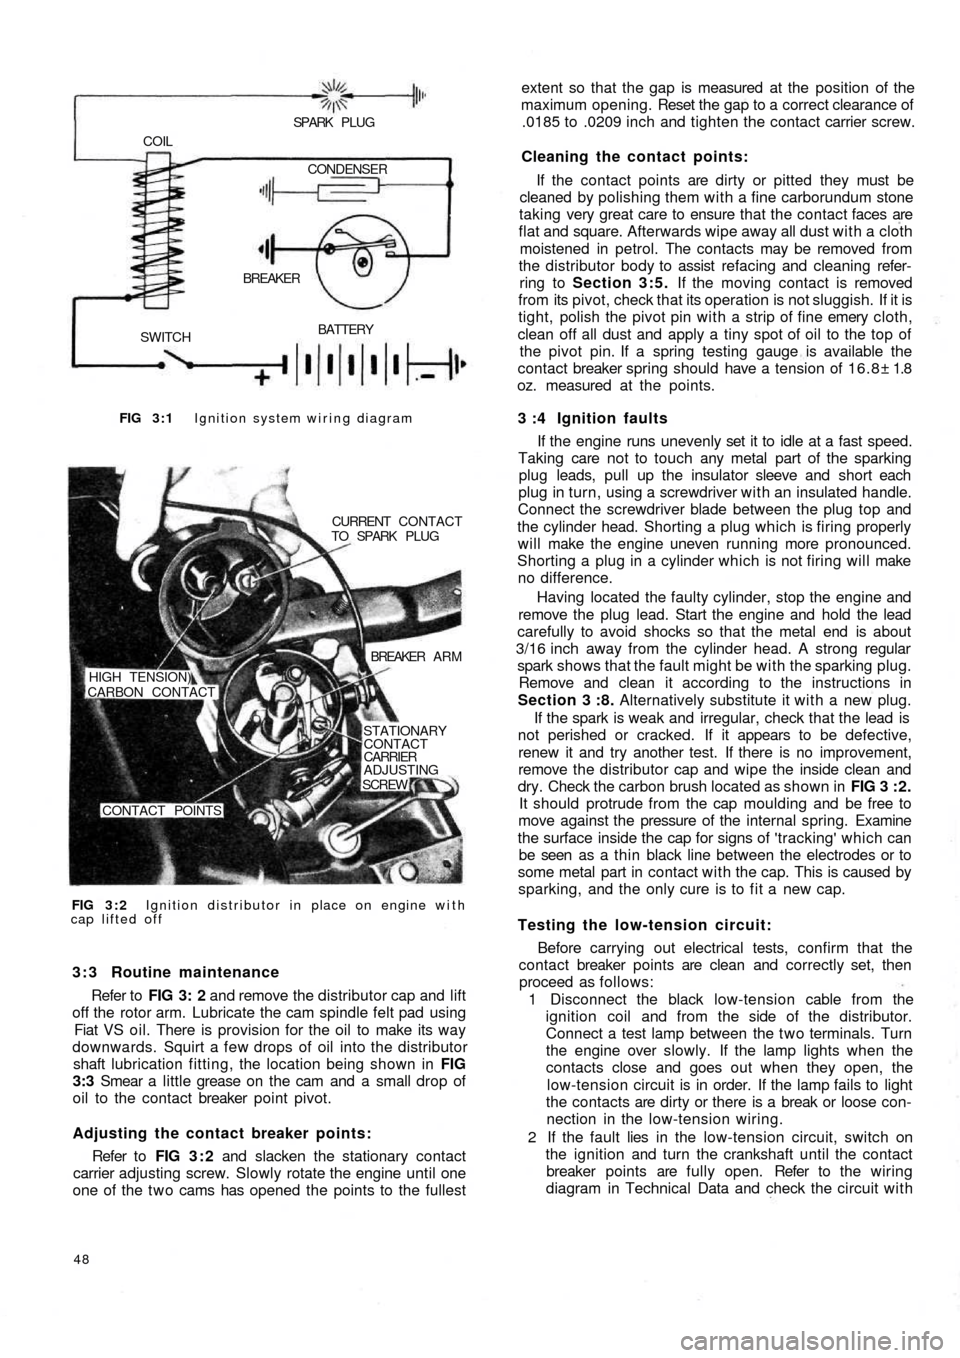 FIAT 500 1971 1.G Workshop Manual FIG 3 : 1 Ignition system wiring diagram
BATTERY
SWITCHBREAKER COIL
SPARK  PLUG
CONDENSER
FIG 3 : 2 Ignition distributor in place on engine with
cap lifted offCURRENT  CONTACT
TO  SPARK  PLUG
BREAKER 